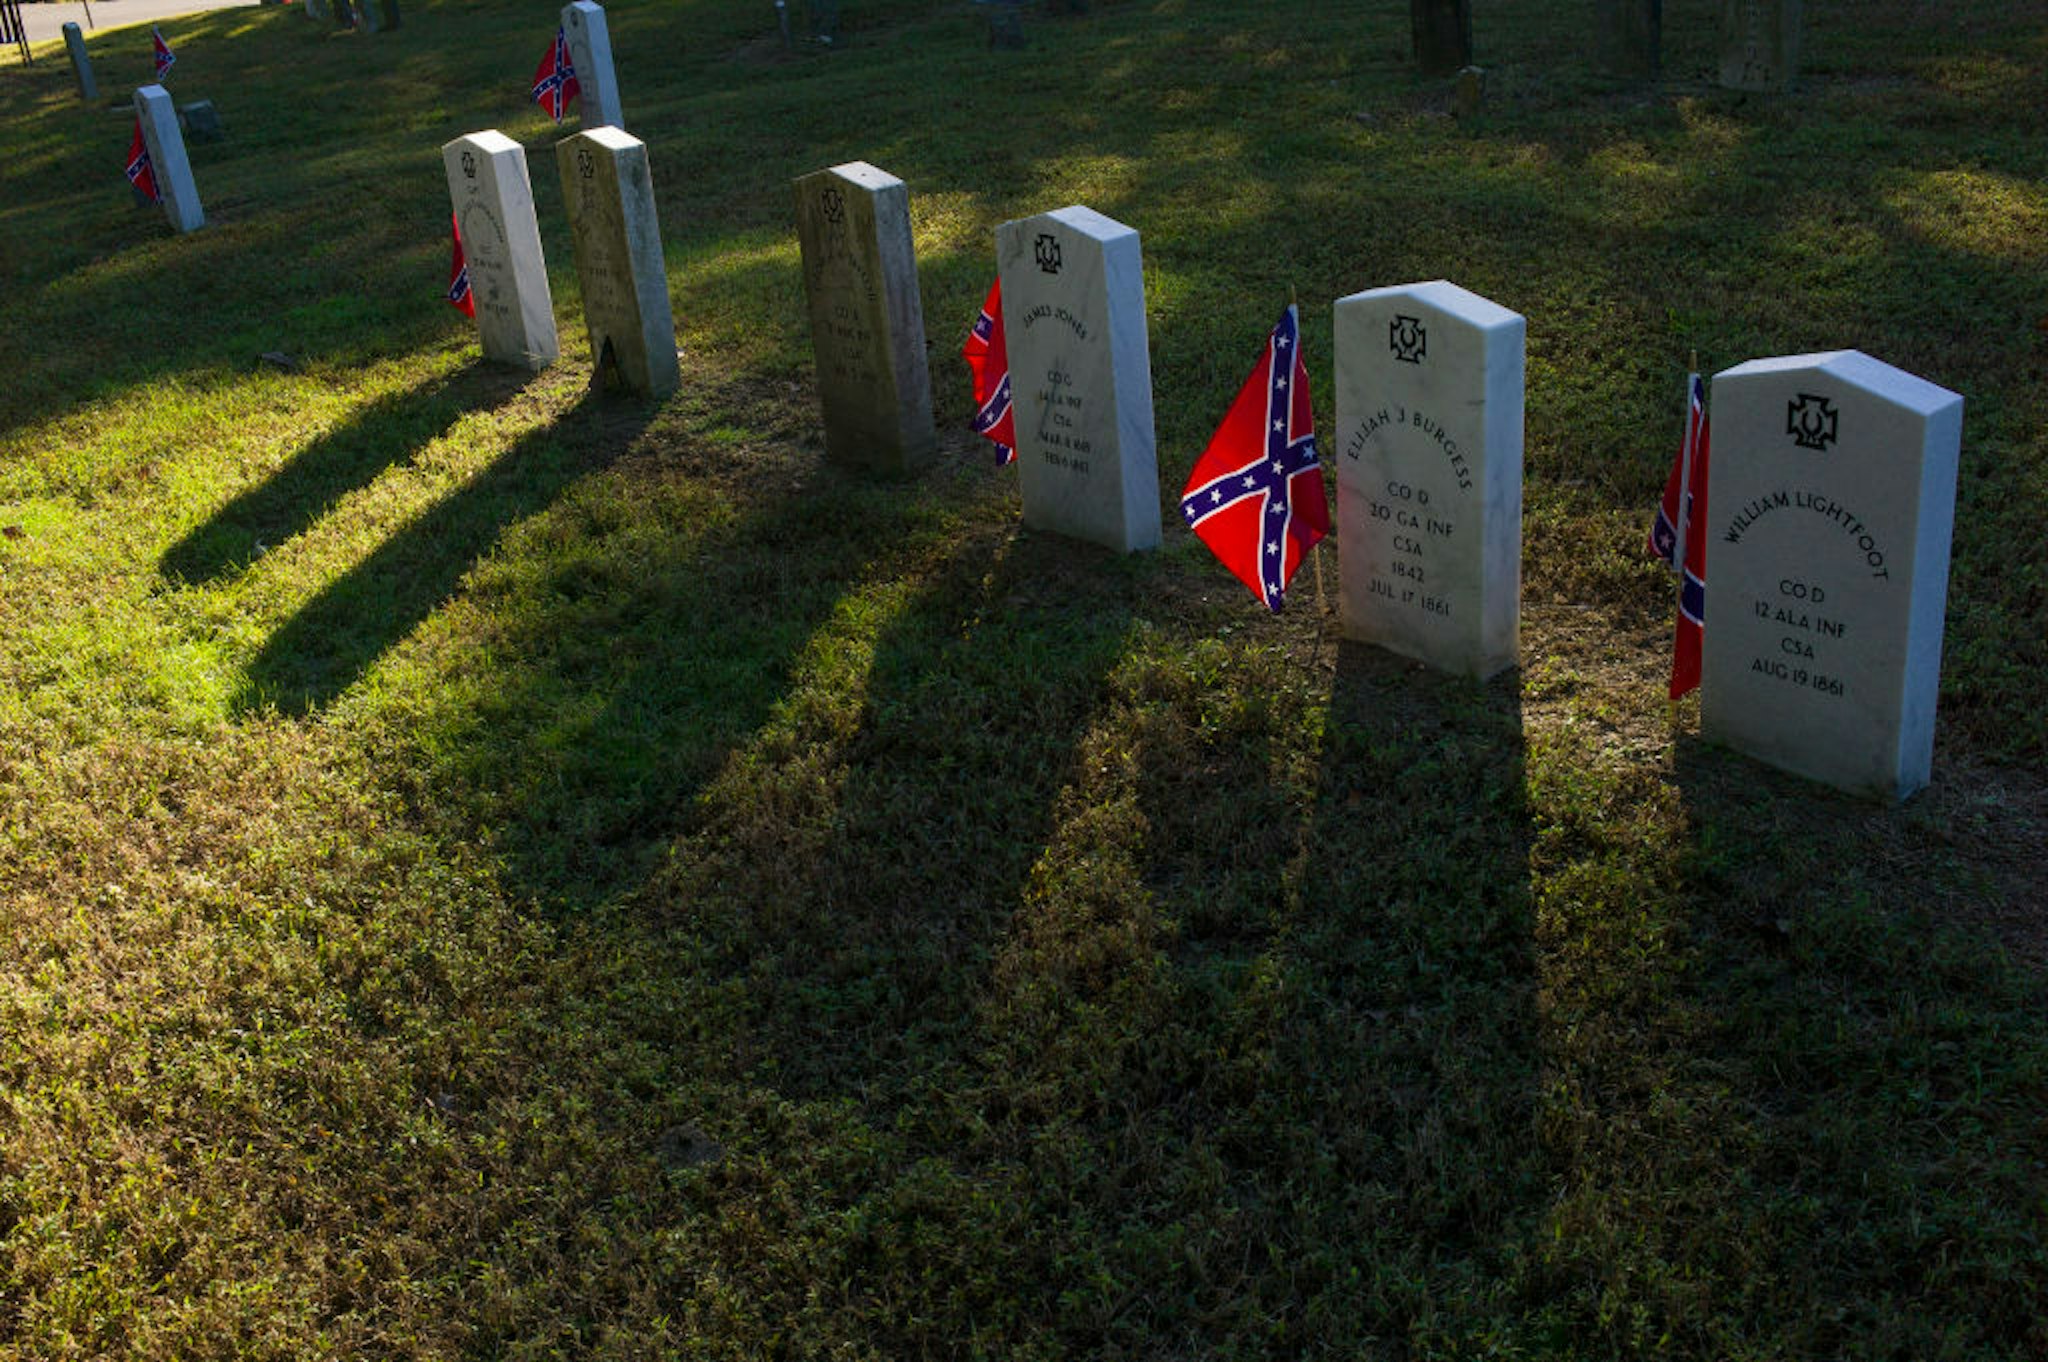 RICHMOND, VA - OCTOBER 18: Confederate flags decorate the graves of Confederate soldiers killed during the Civil War on October 18, 2018 in the historical Hollywood Cemetery in Richmond, Virginia.